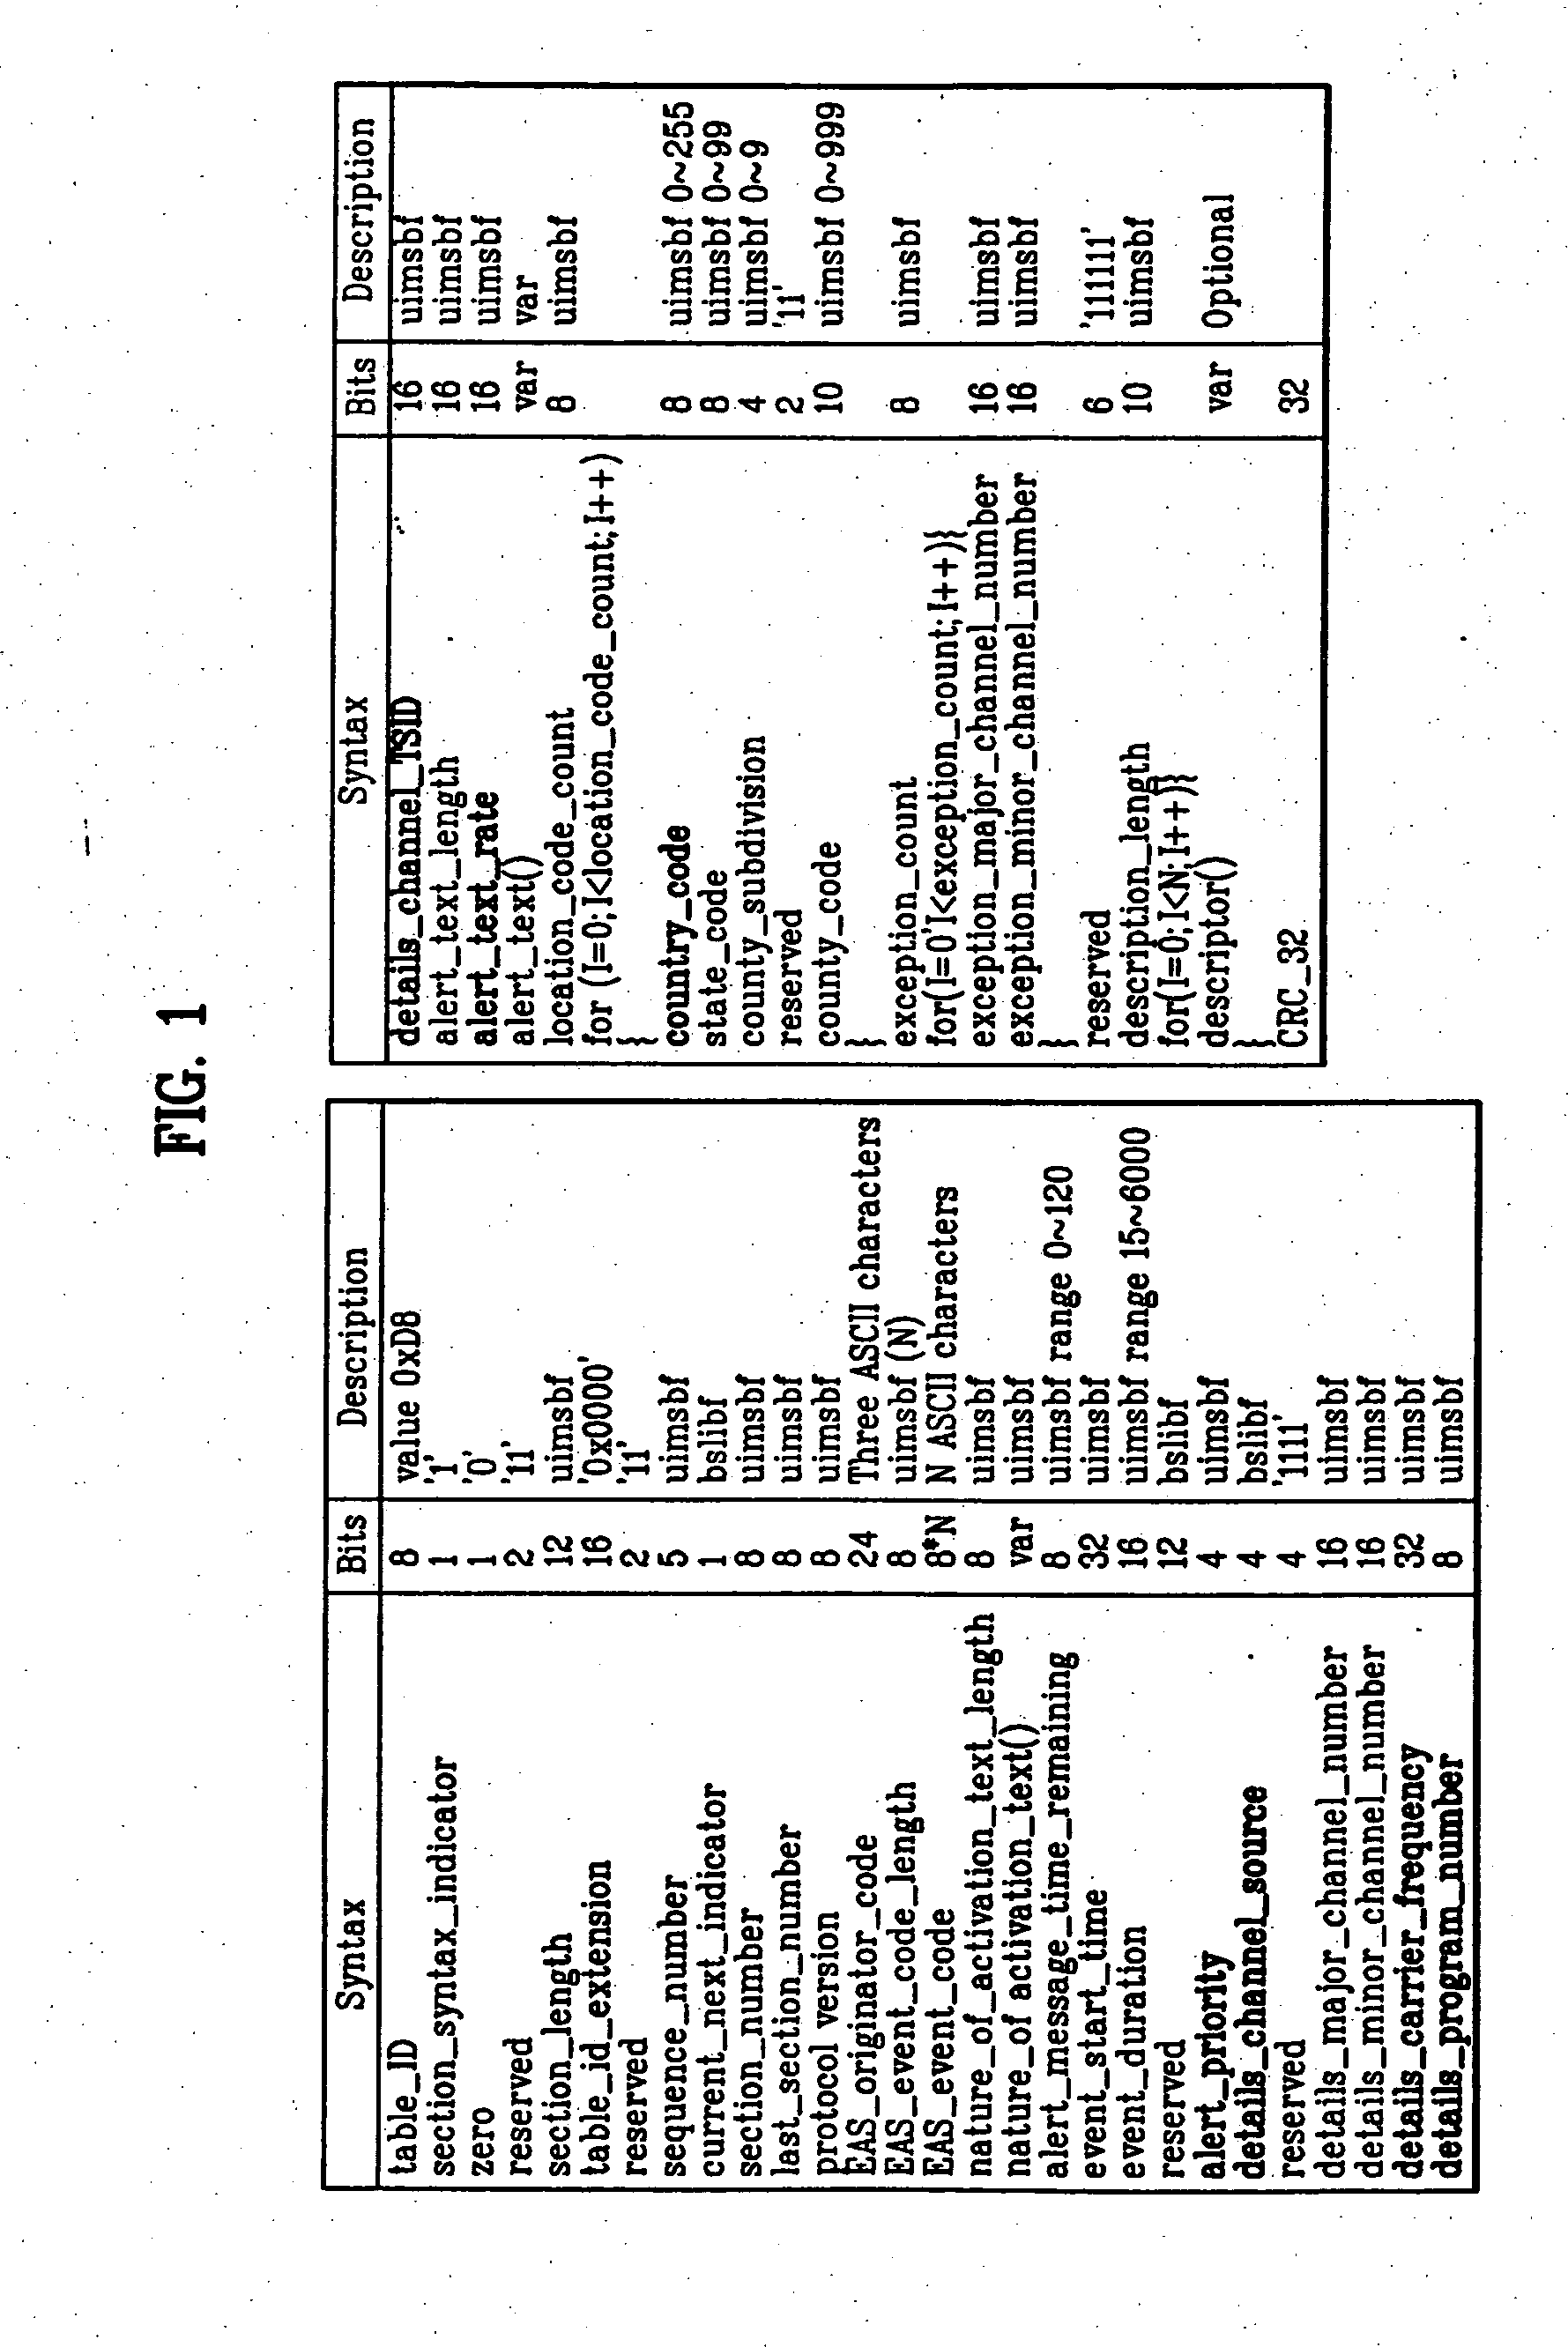 Emergency alert signaling method and DTV receiver